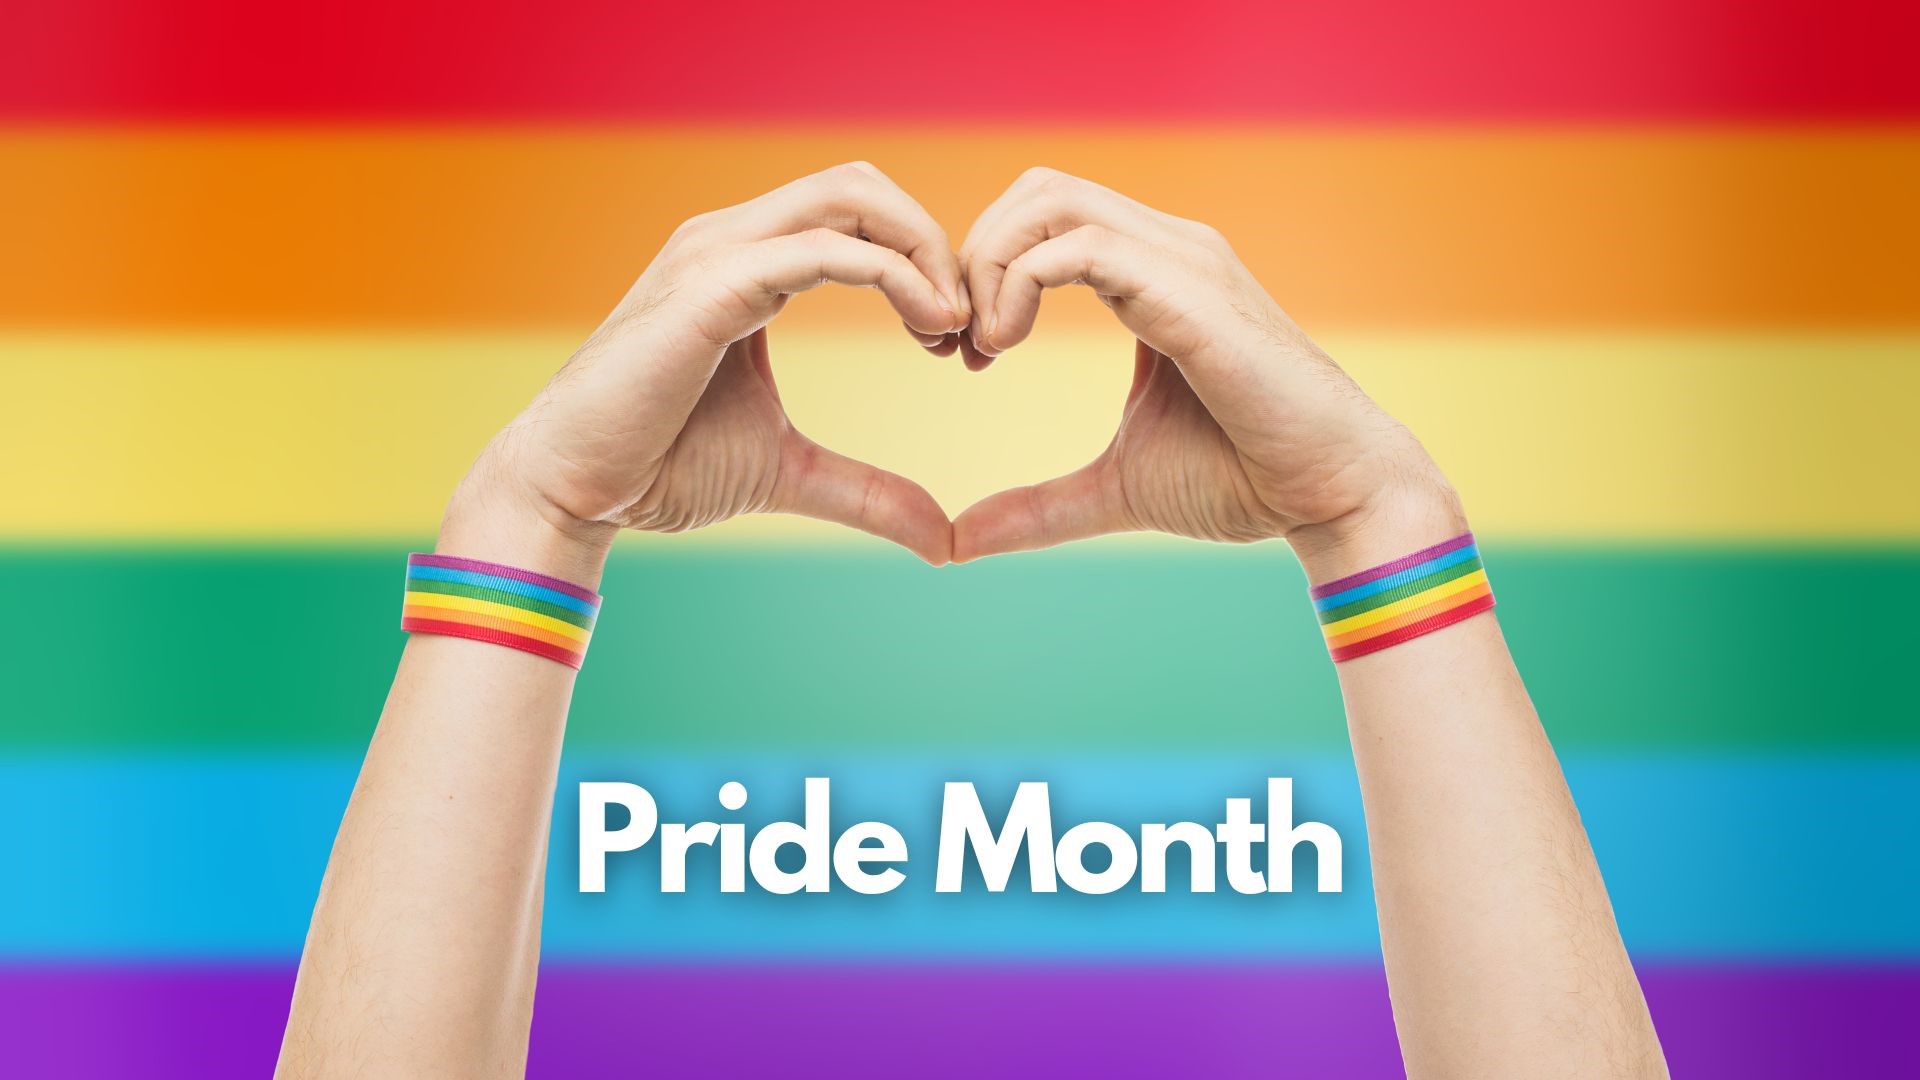 As we celebrate Pride Month, we highlight members of the LGBTQ+ community and look back at the fight for rights through the years.